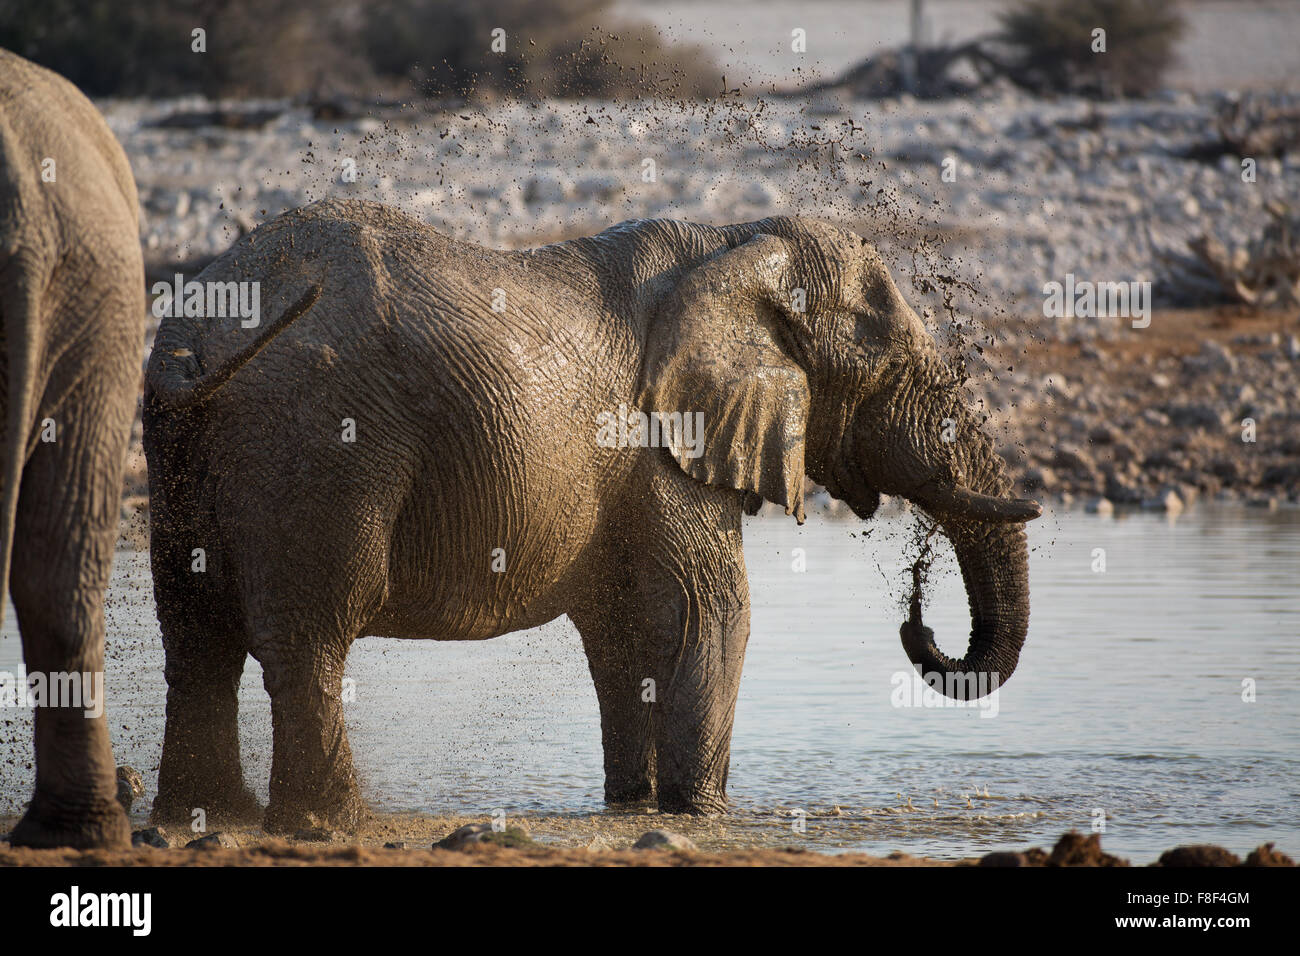 An elephant having a bath by throwing water over itself at the Okaukuejo, Etosha National Park, Namibia Stock Photo